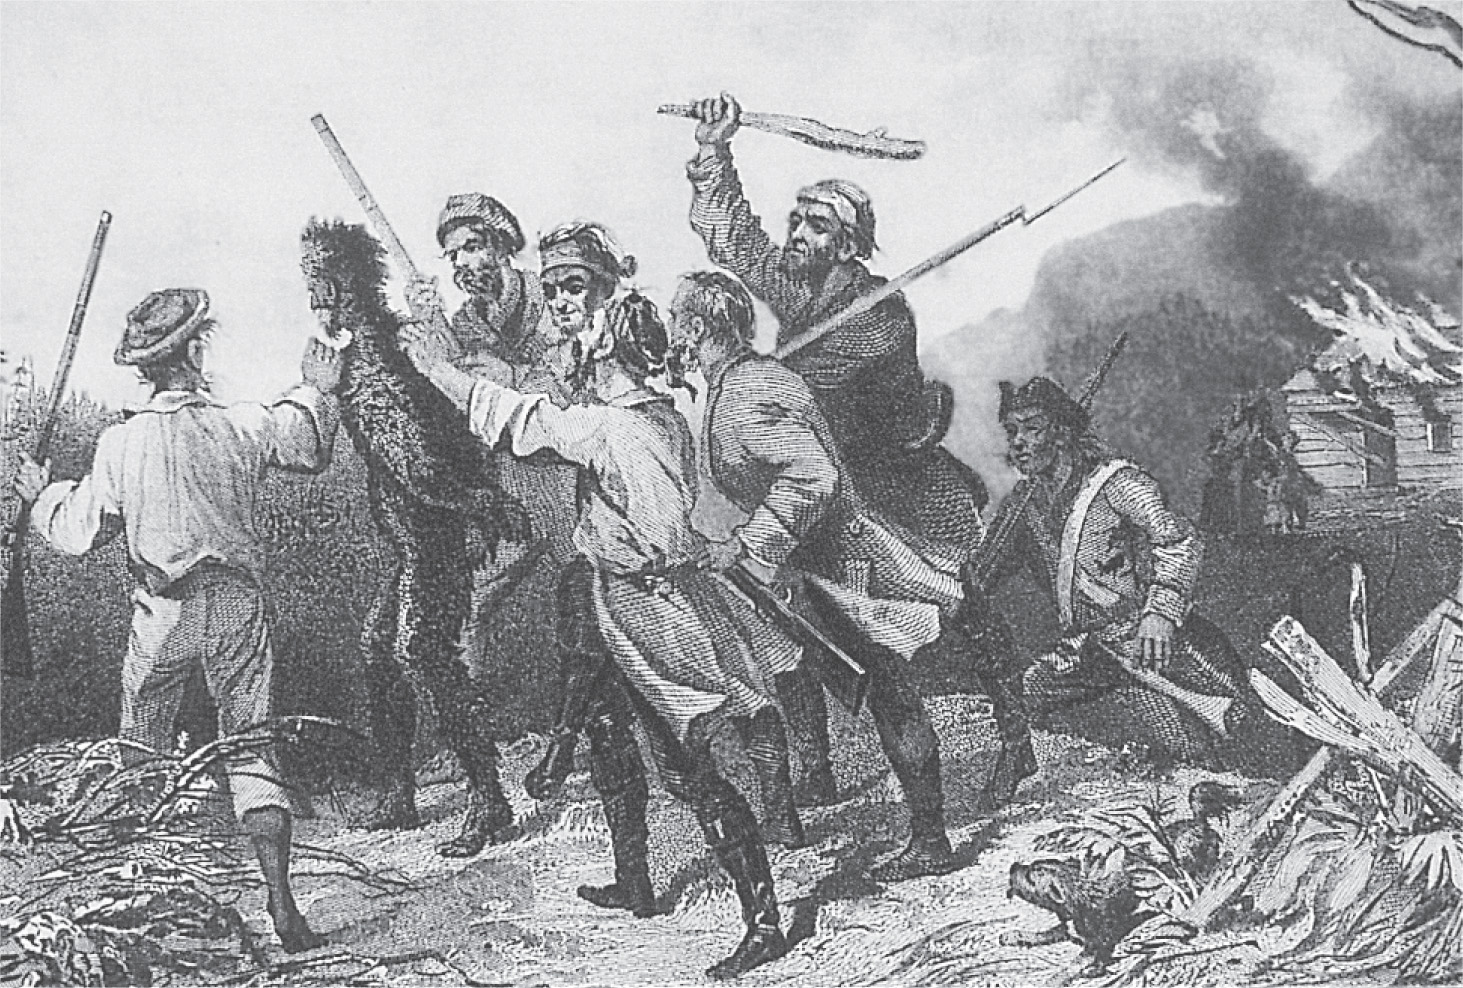 In a drawing, men with clubs and guns shove a man covered in
black tar.